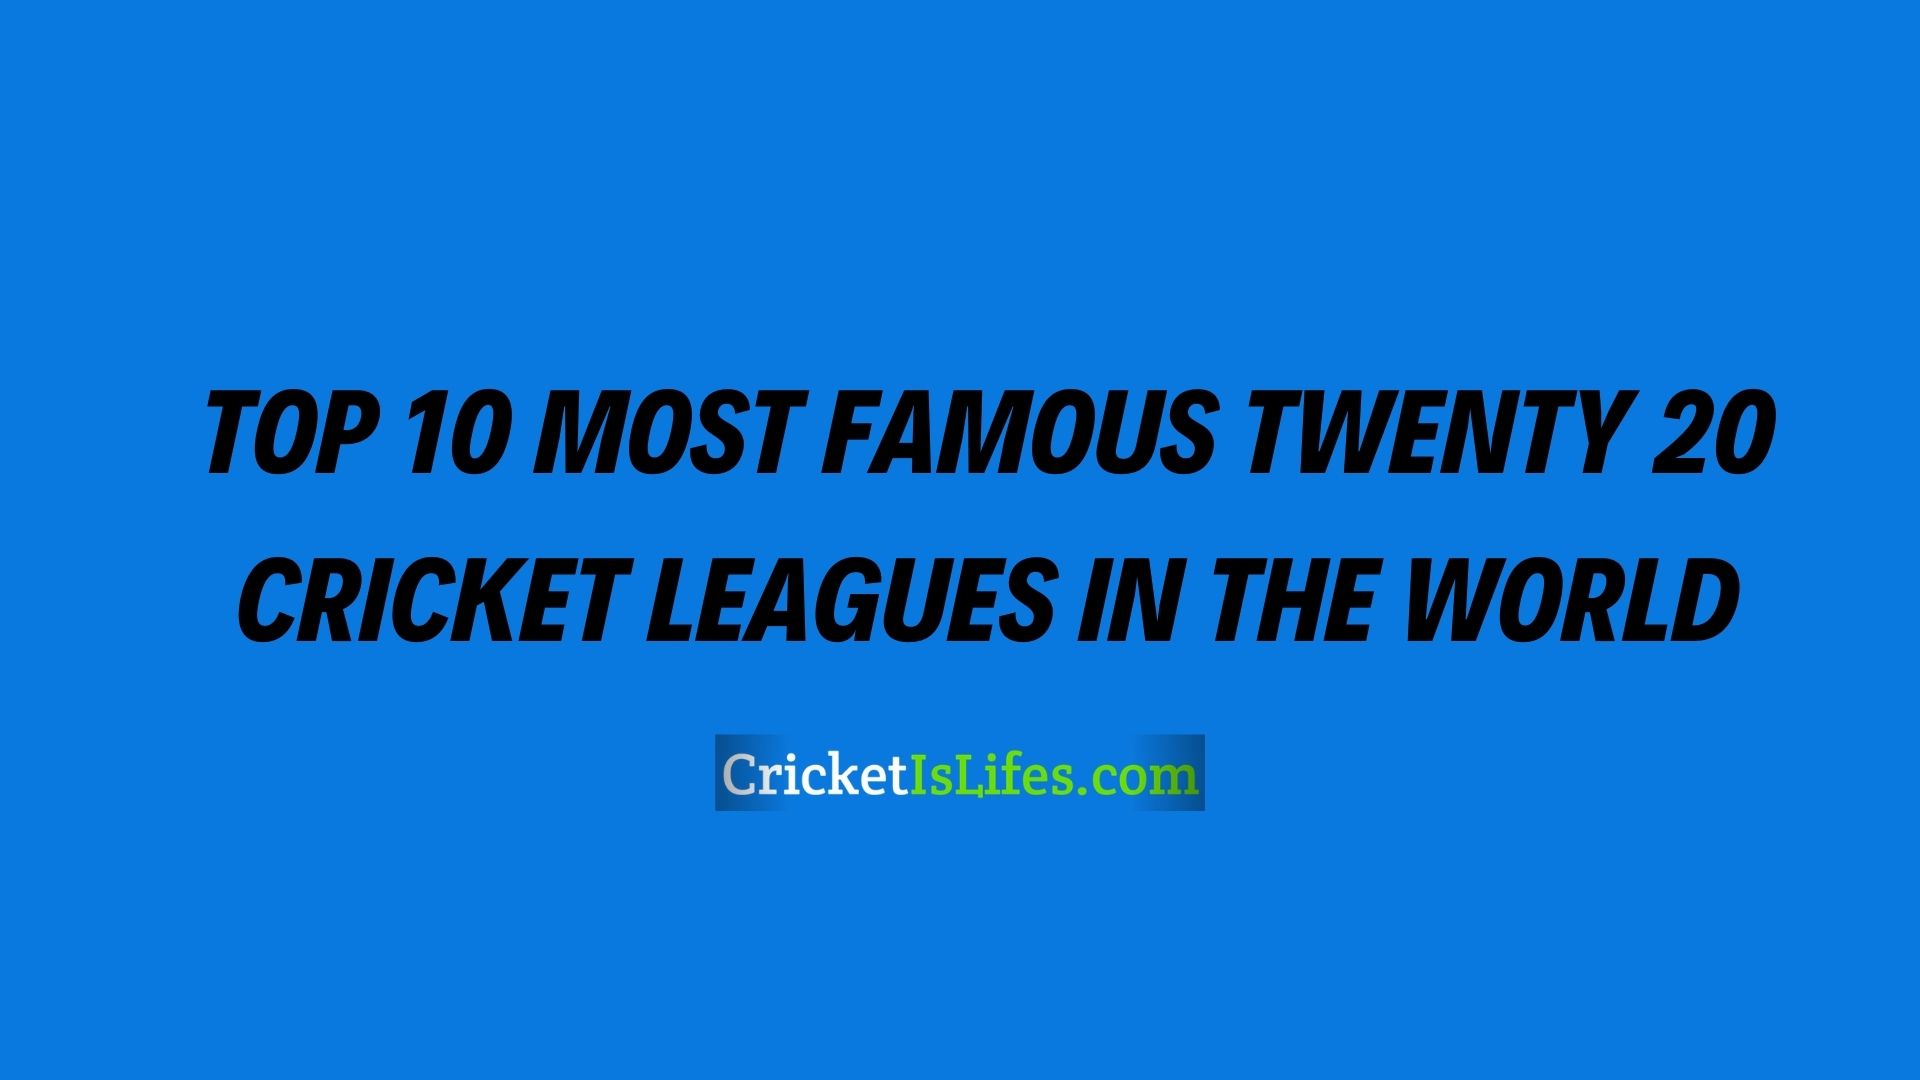 Ranking Top 10 Famous Domestic T20 Cricket Leagues in 2021